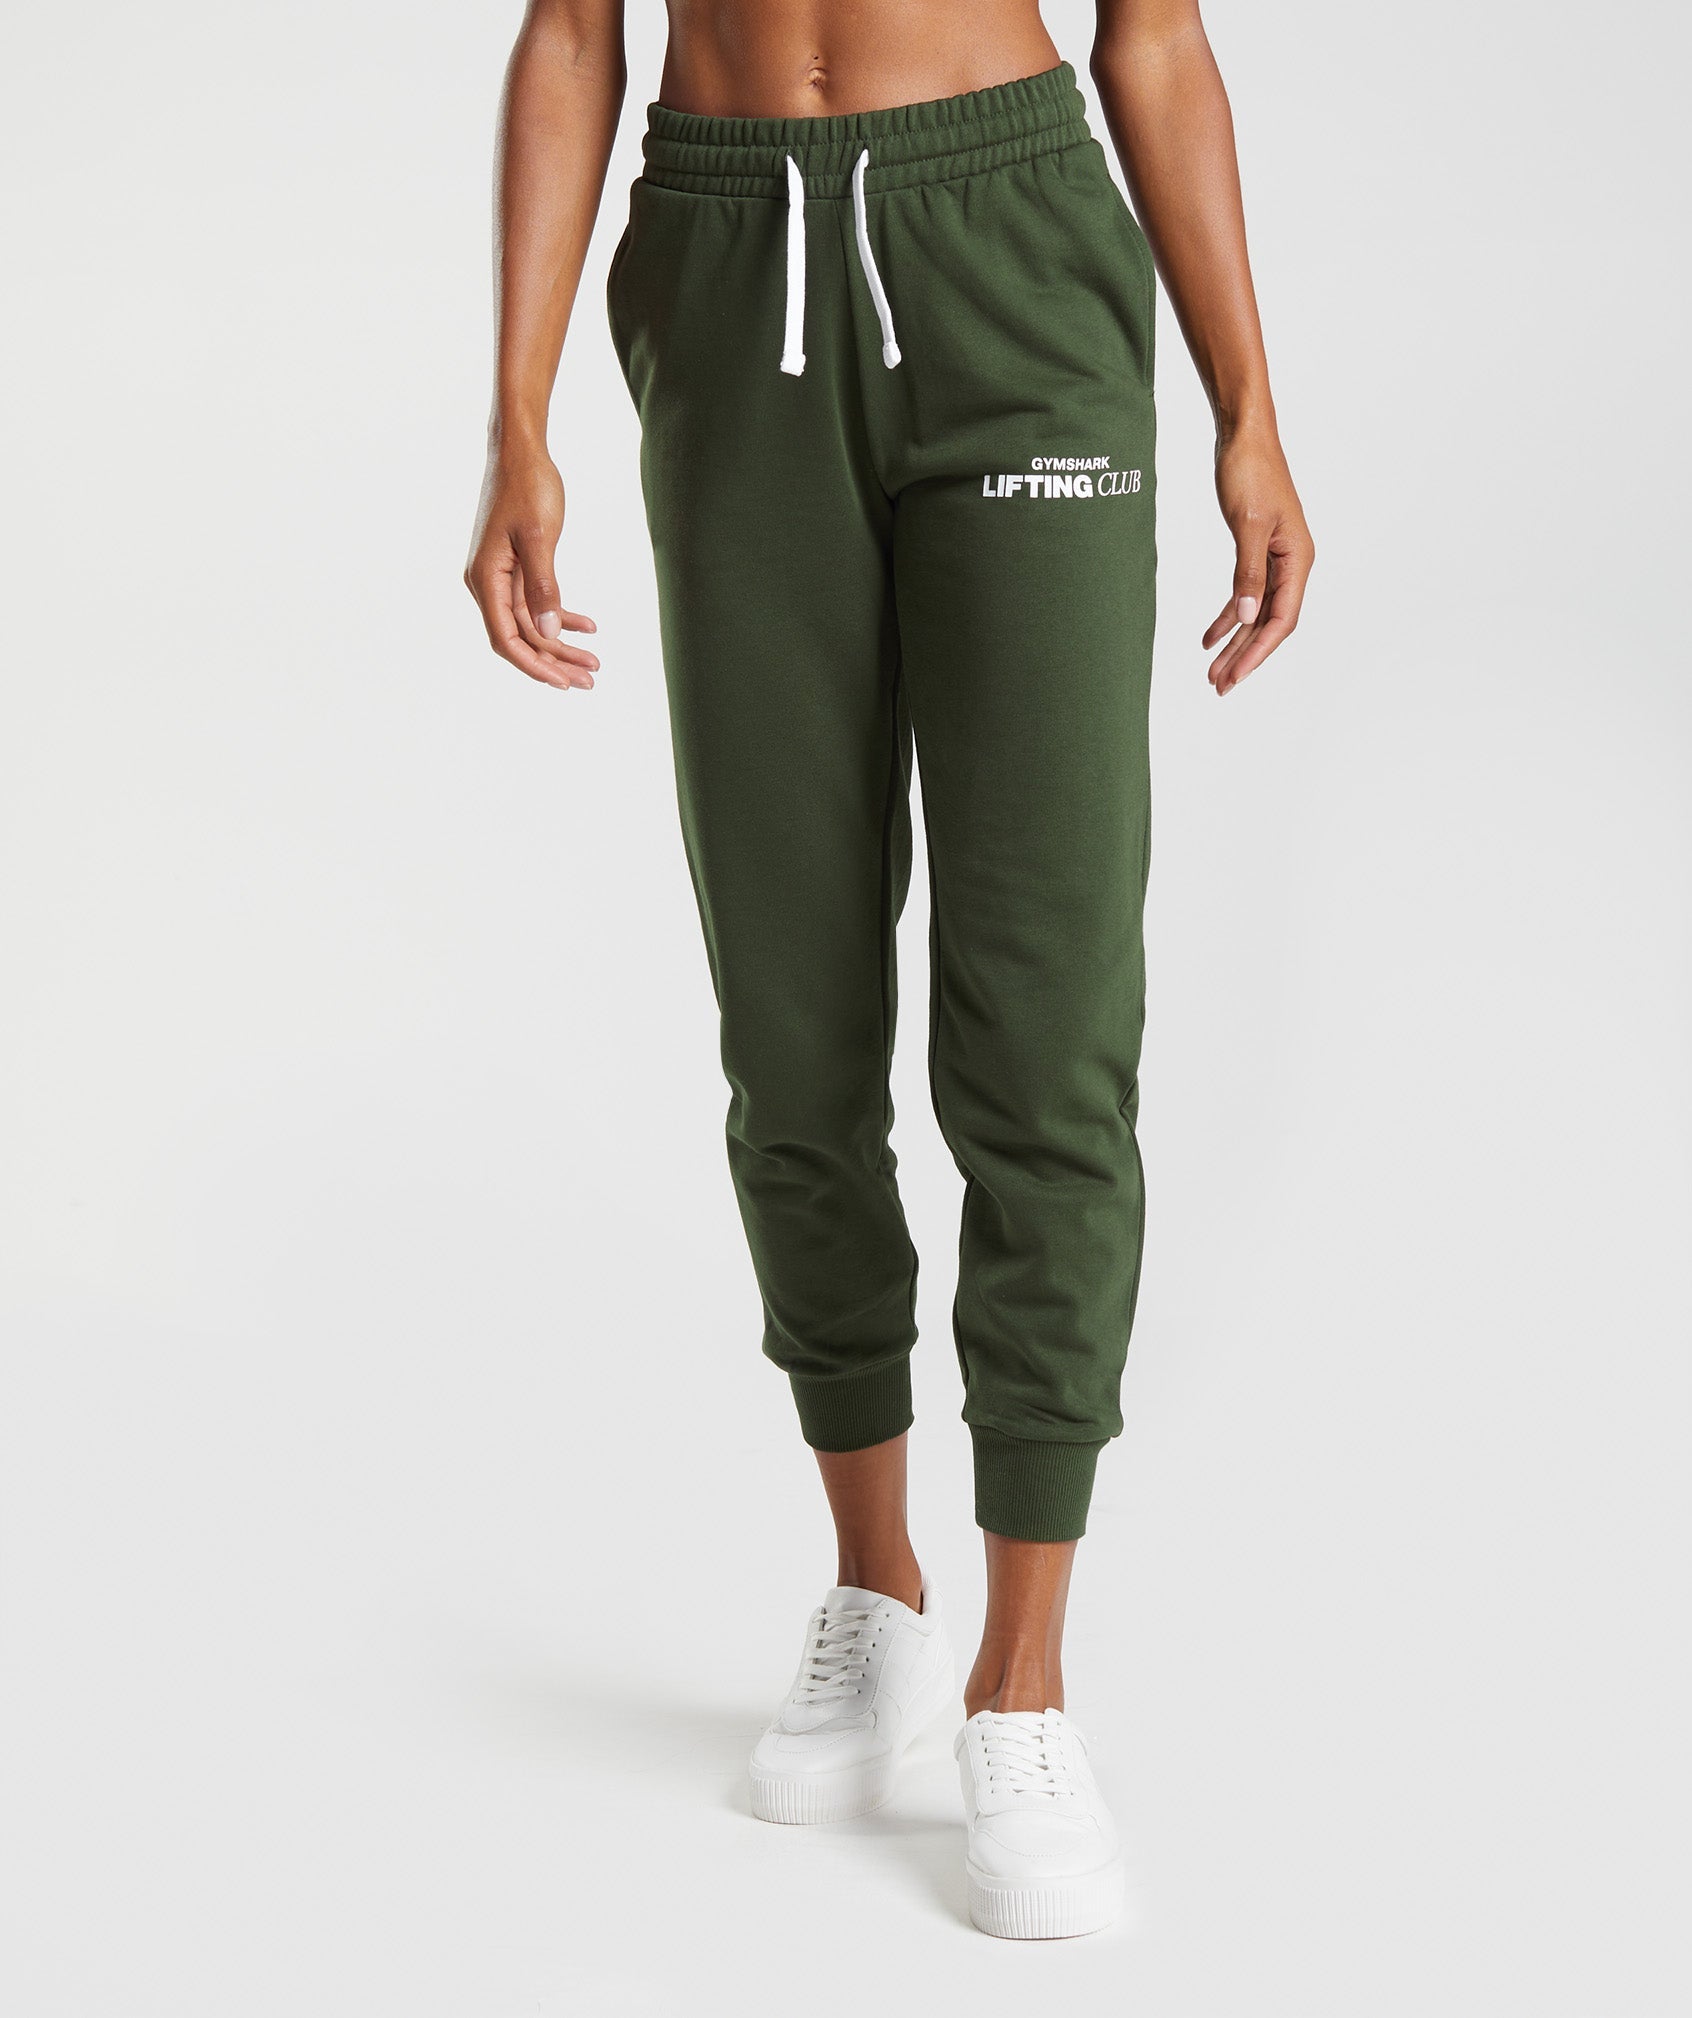 Social Club Joggers in Moss Olive